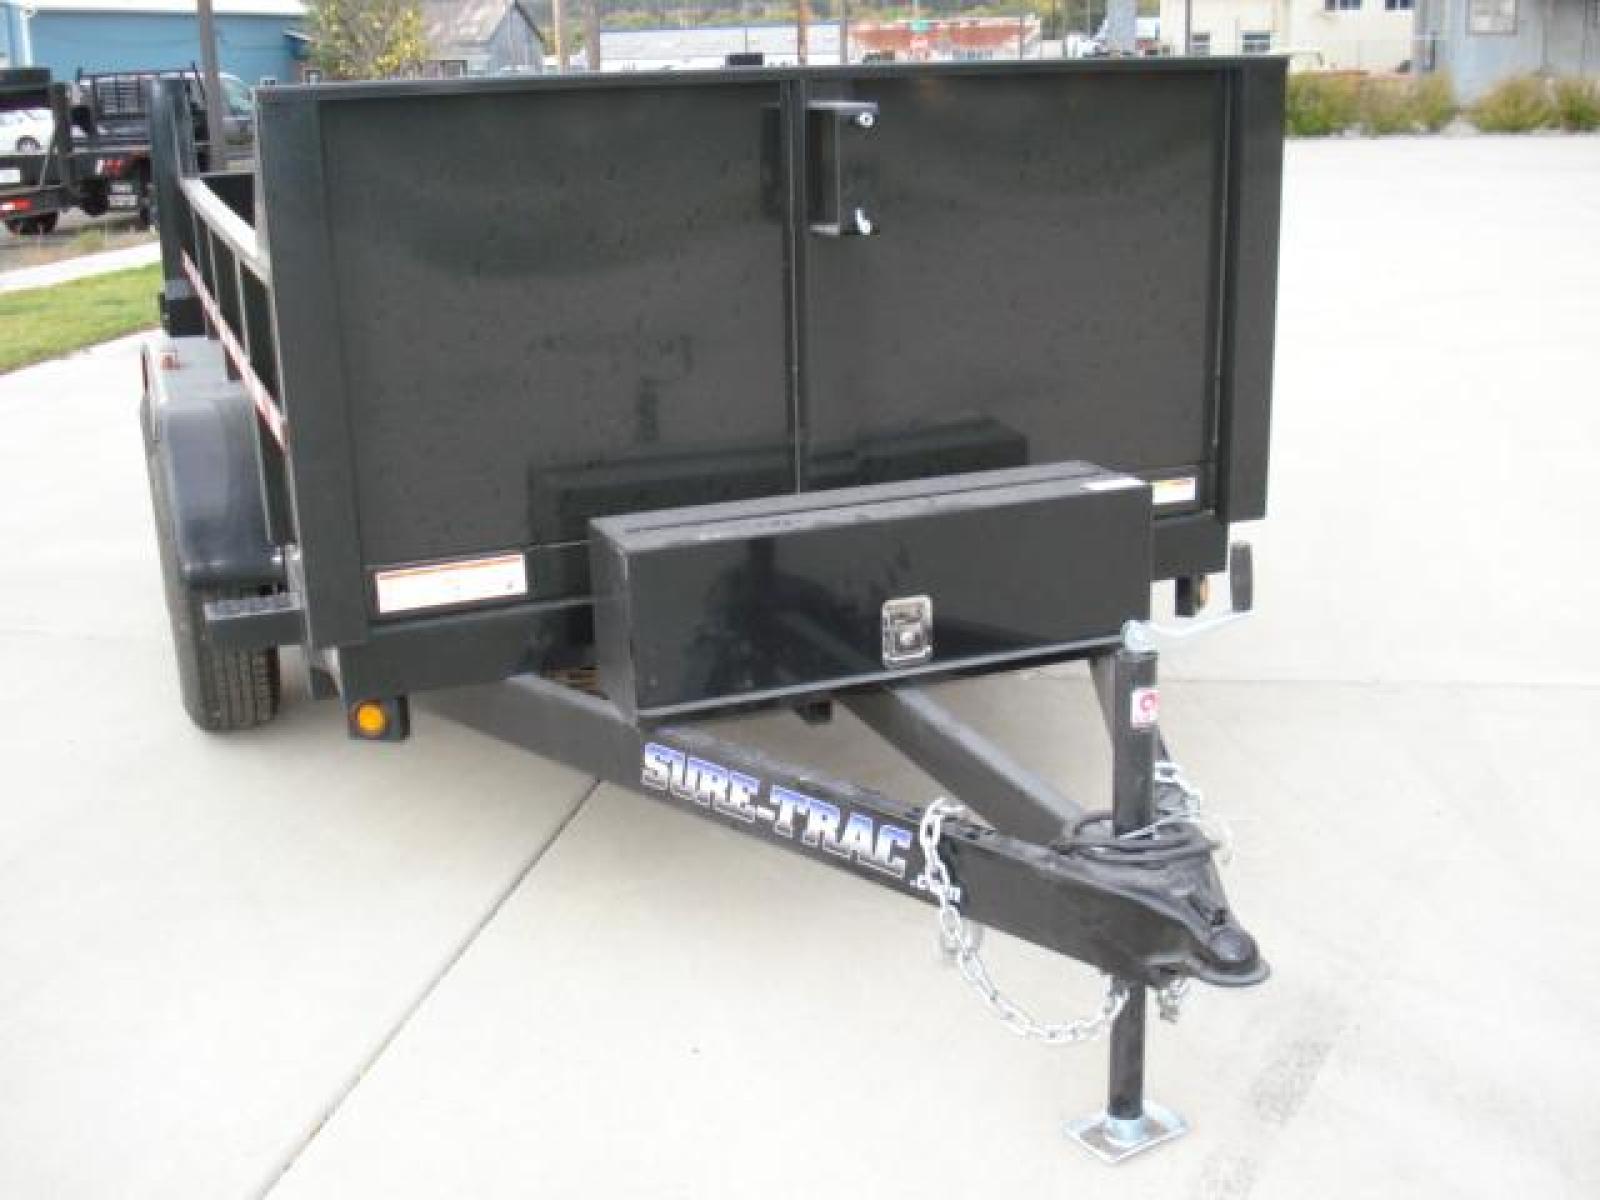 2022 Black SureTrac 6 x10 Lo Pro Dump Trailer , located at 310 West 1st Ave, Big Timber, MT, 59011, (406) 860-8510, 45.833511, -109.957809 - SURE-TRAC 6 X 10 LO PRO DUMP TRAILER, 10K GVW, SINGLE RAM HOIST, EZ LUBE HUBS, DUAL REAR GATE, BRAKES BOTH AXLES, EZ LUBE HUBS, (5) D-RING TIE-DOWNS, LED LIGHTS, POWDER COAT FINISH, REAR RAMPS, MESH TARP, DEEP CYCLE BATTERY. OPTIONS: SPARE TIRE $165.00. THE BEST TRAILERS AT THE BEST PRICE!!! - Photo #4